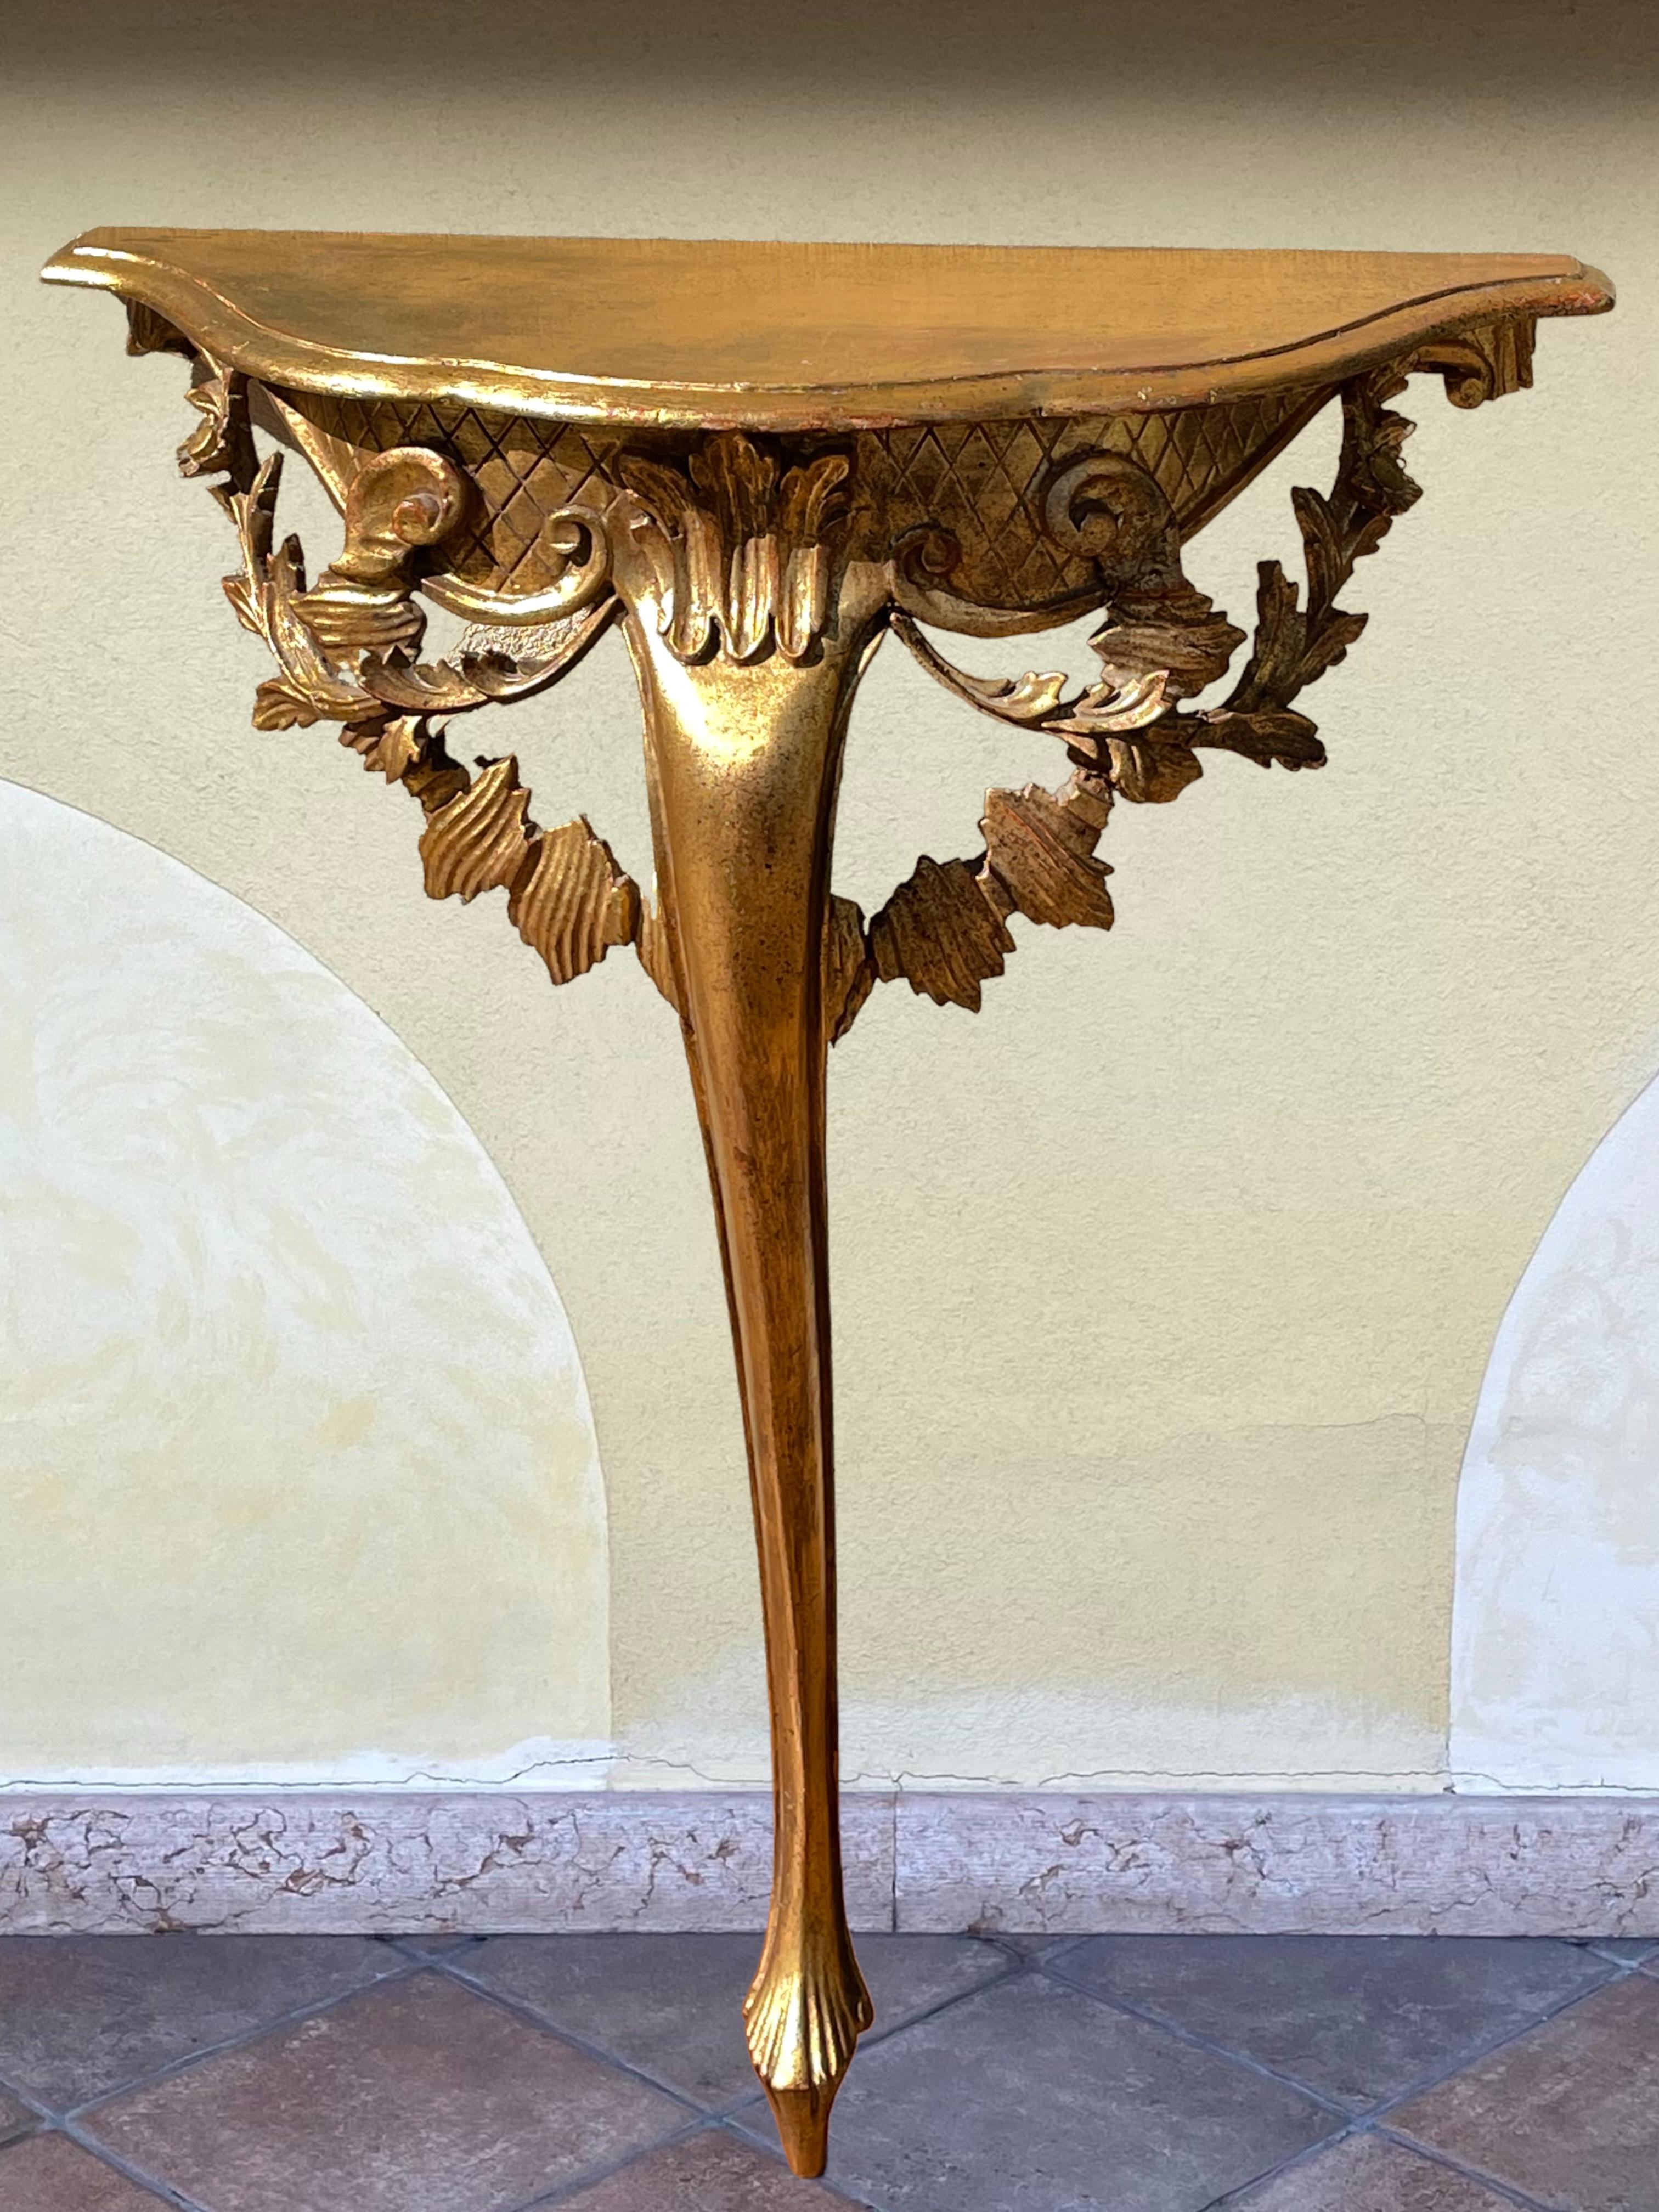 Offered is an absolutely stunning, 1920s Italian gilt wood wall console table. Minor patina gives this piece a classy statement. Made of hand carved wood and gilded. A nice table to present a statuette or a beautiful object. A nice addition for your